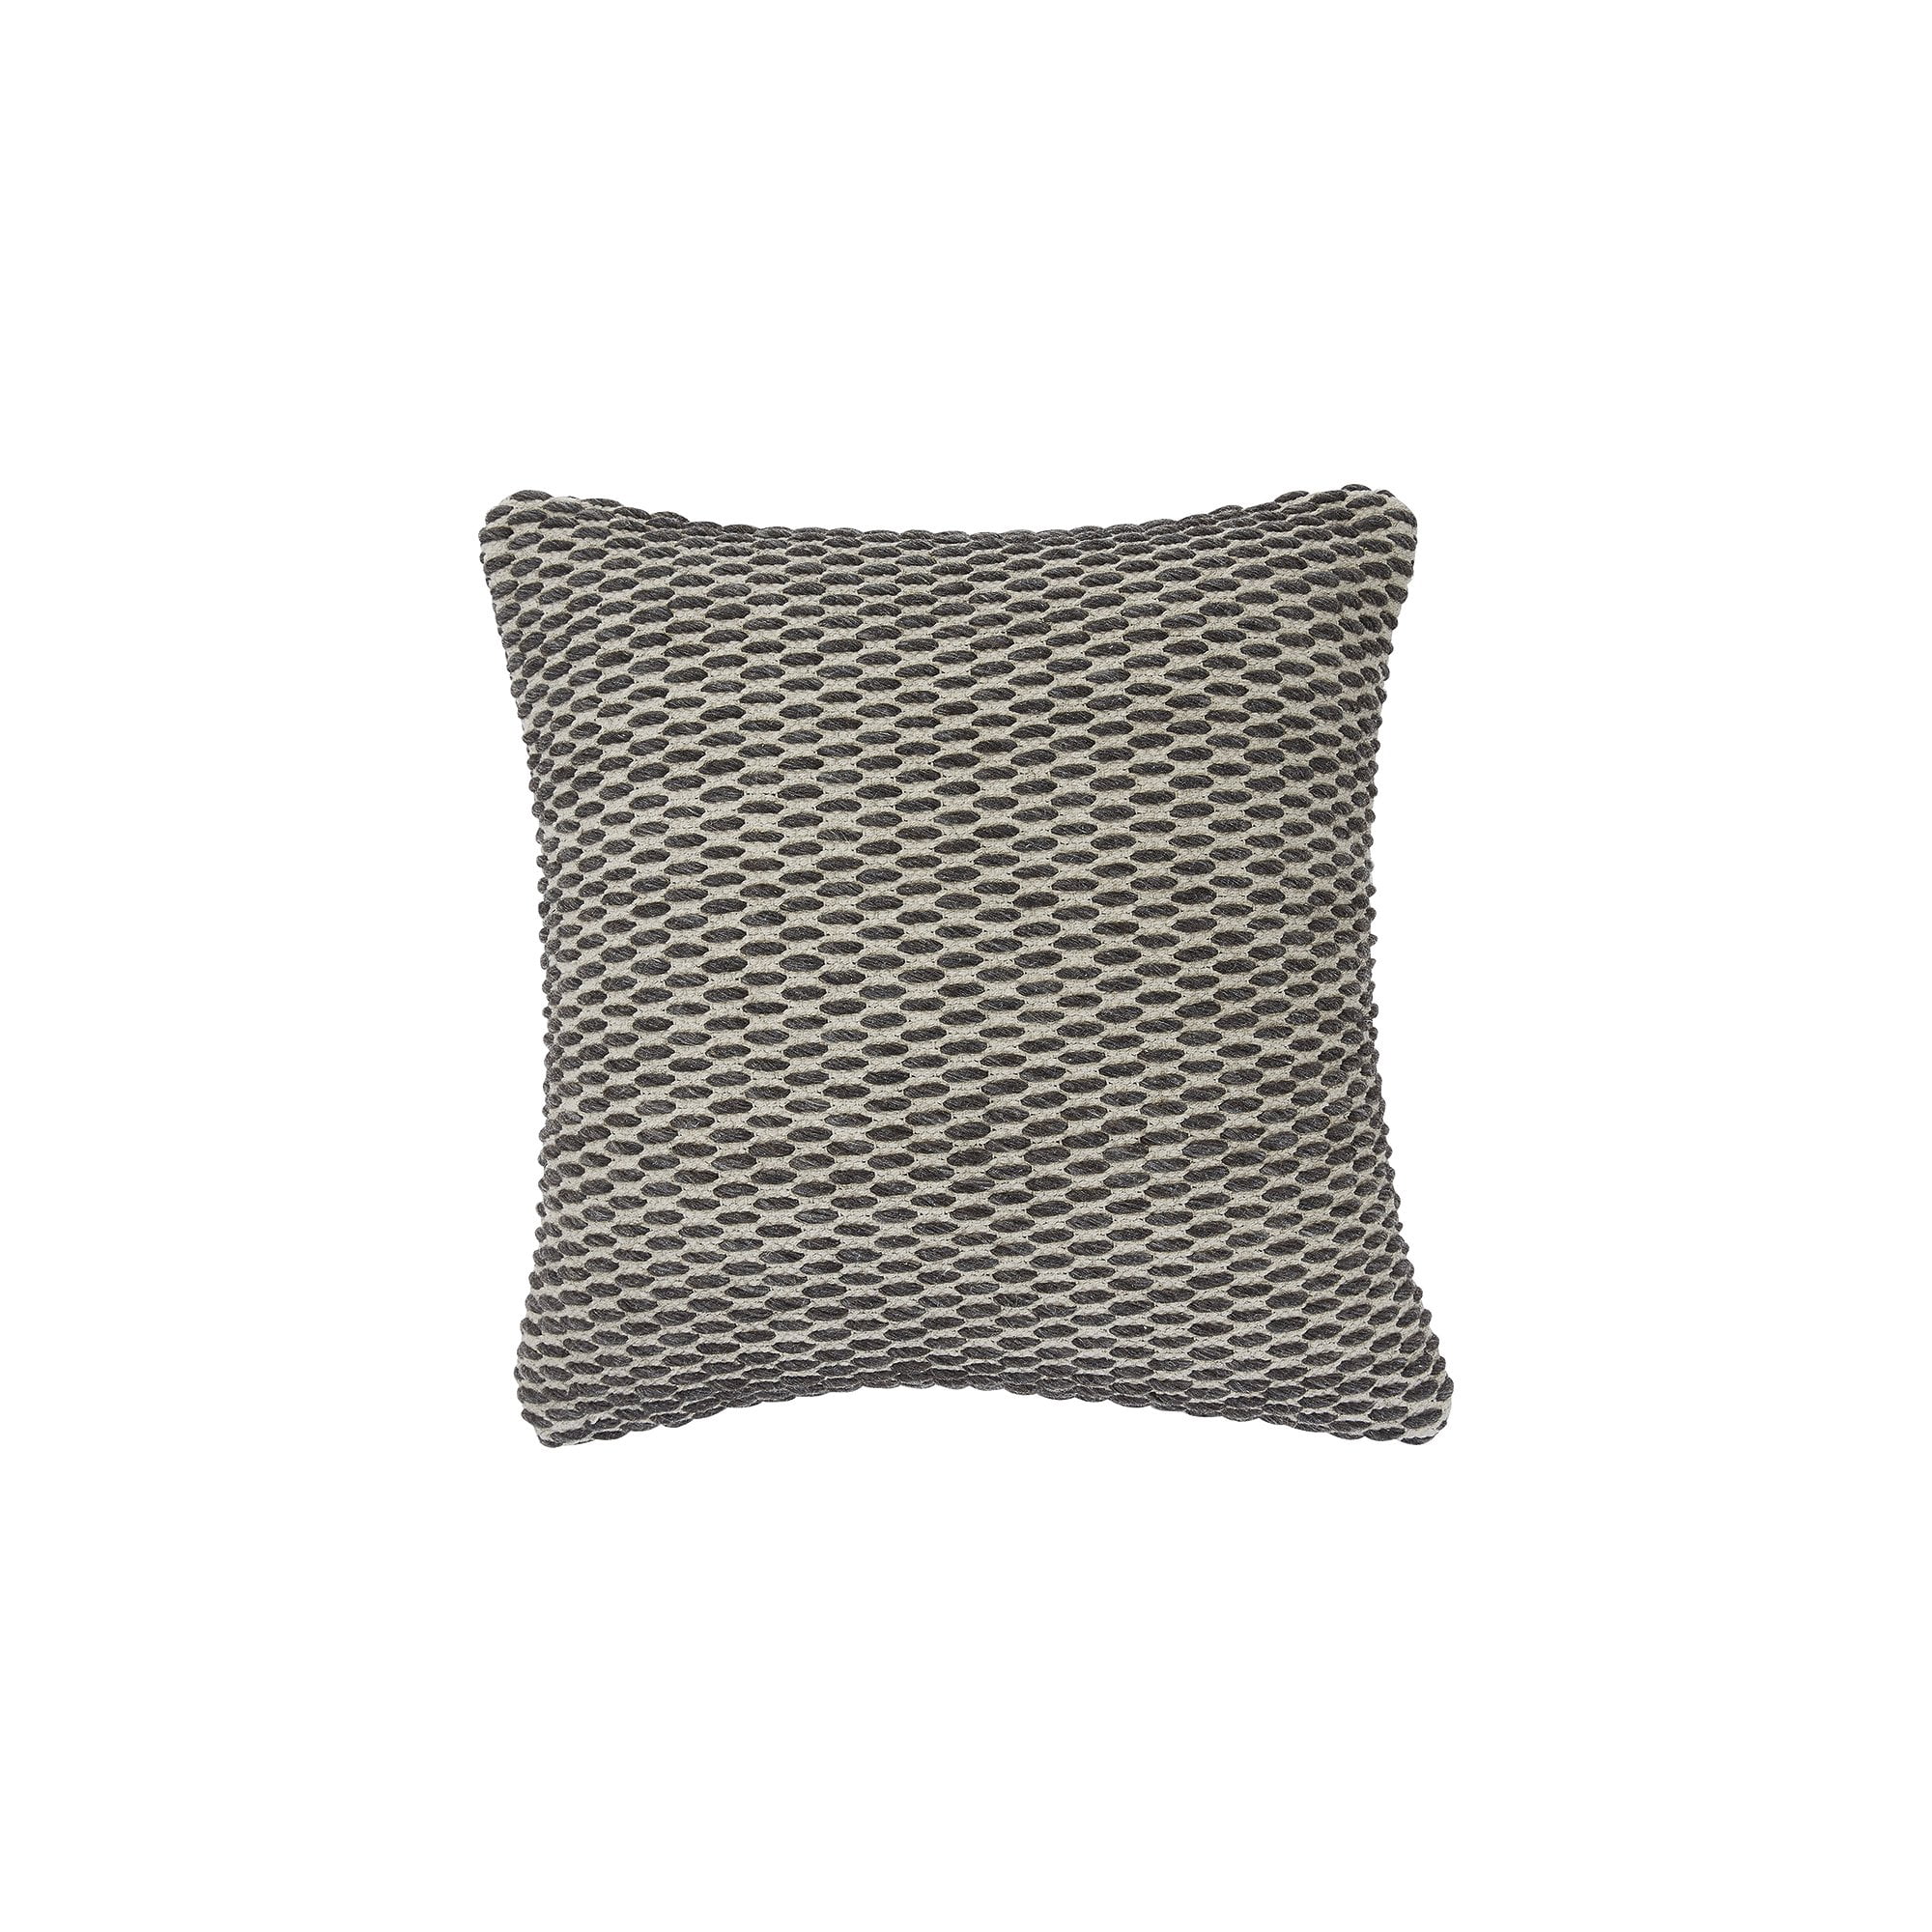 20 x 20 Inches Gray Signature Design by Ashley Larae Solid Throw Pillow 